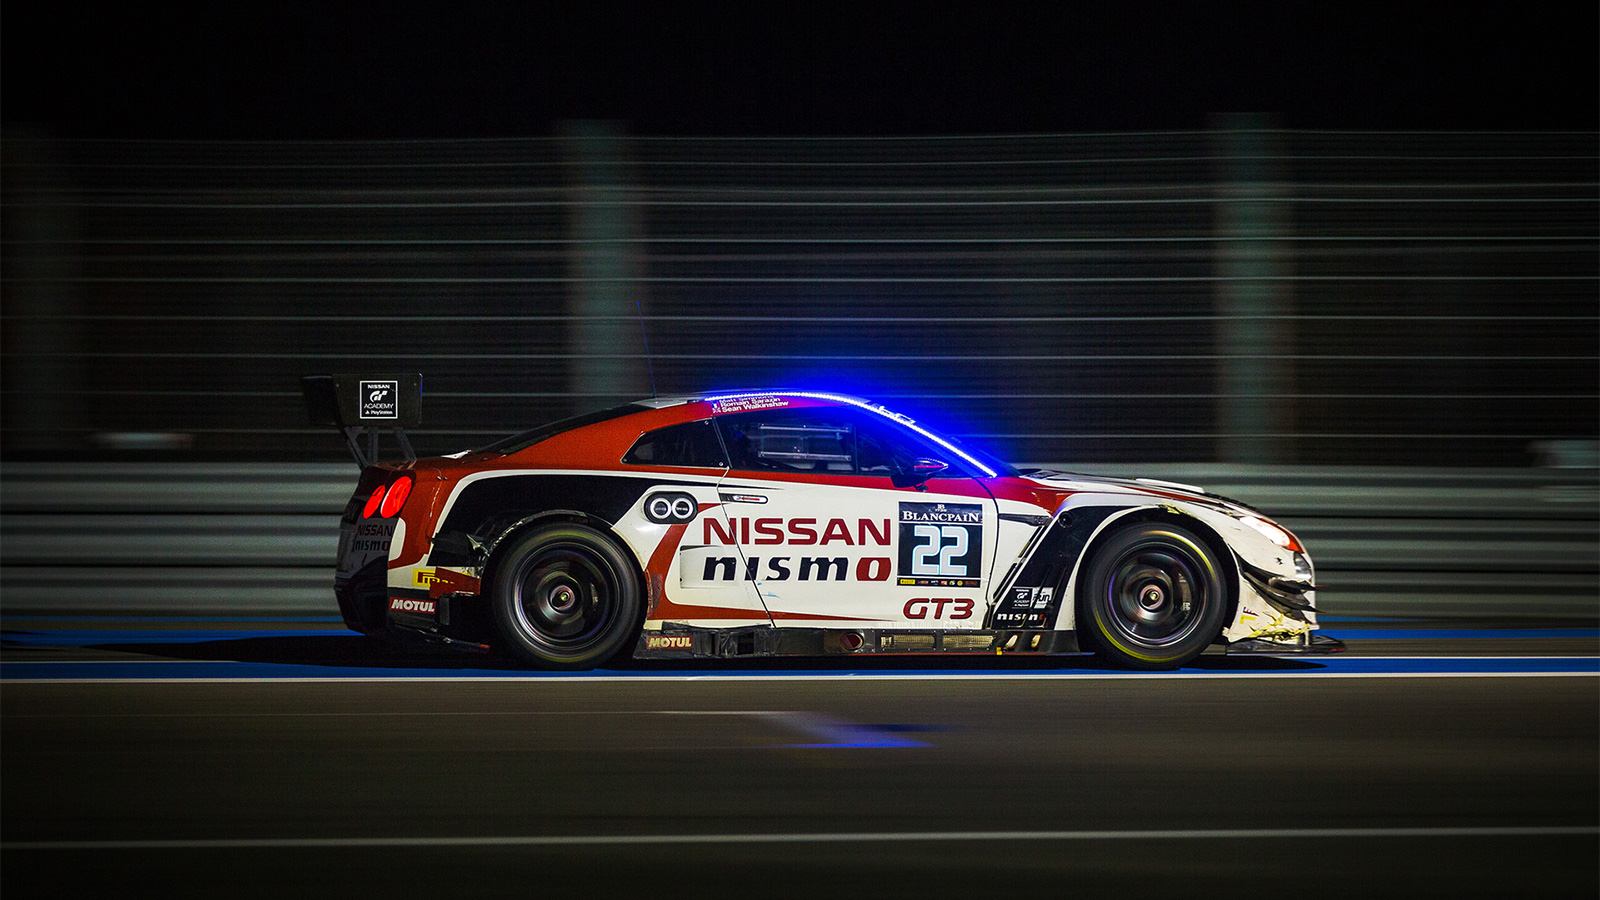 Sean returned to the track to hoist the No.22 Nissan into 14th place in Pro-Am and 37th overall.